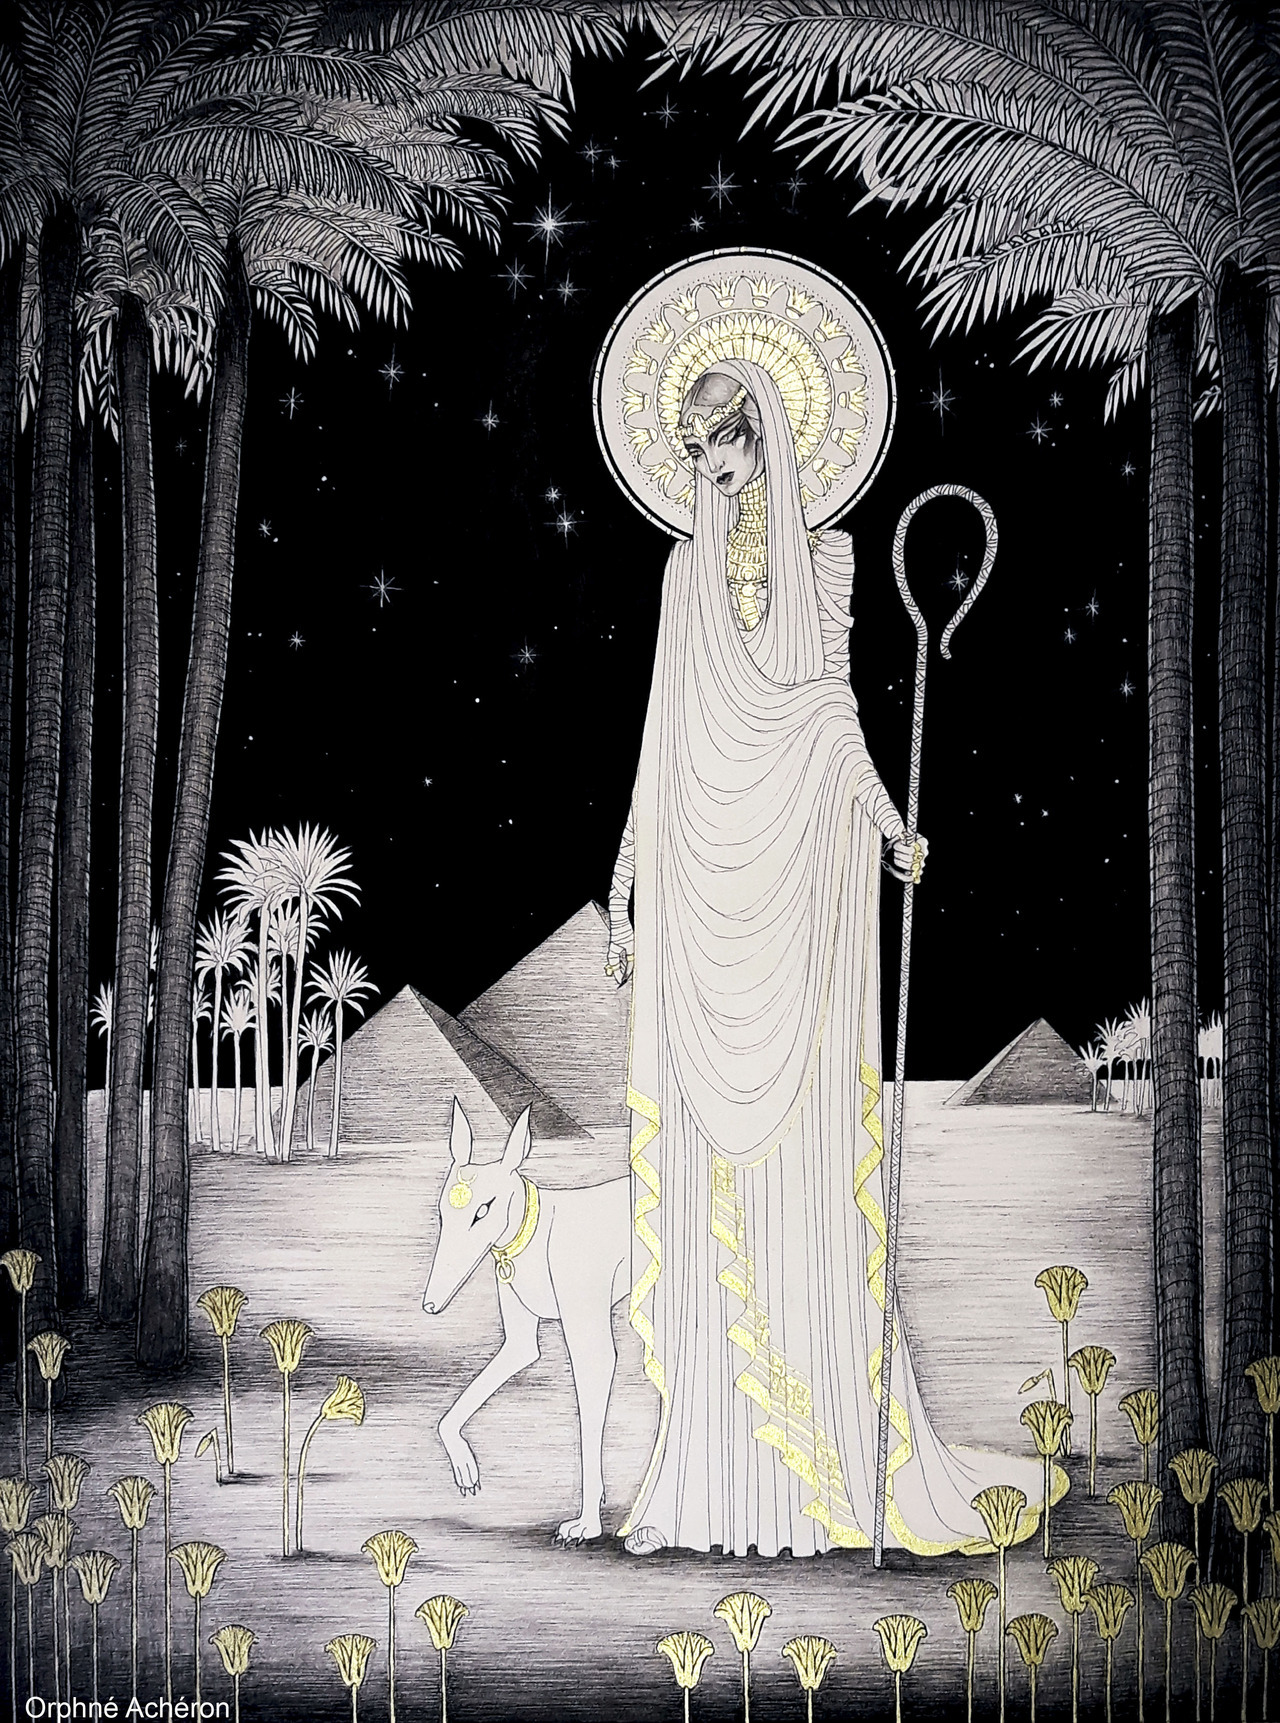 SHEPHERDESS.THE LIGHT OF VENUS ON THE NILE.XIX.III.MMXIX. by Orphné Achéron.
pencil, ink and gold.